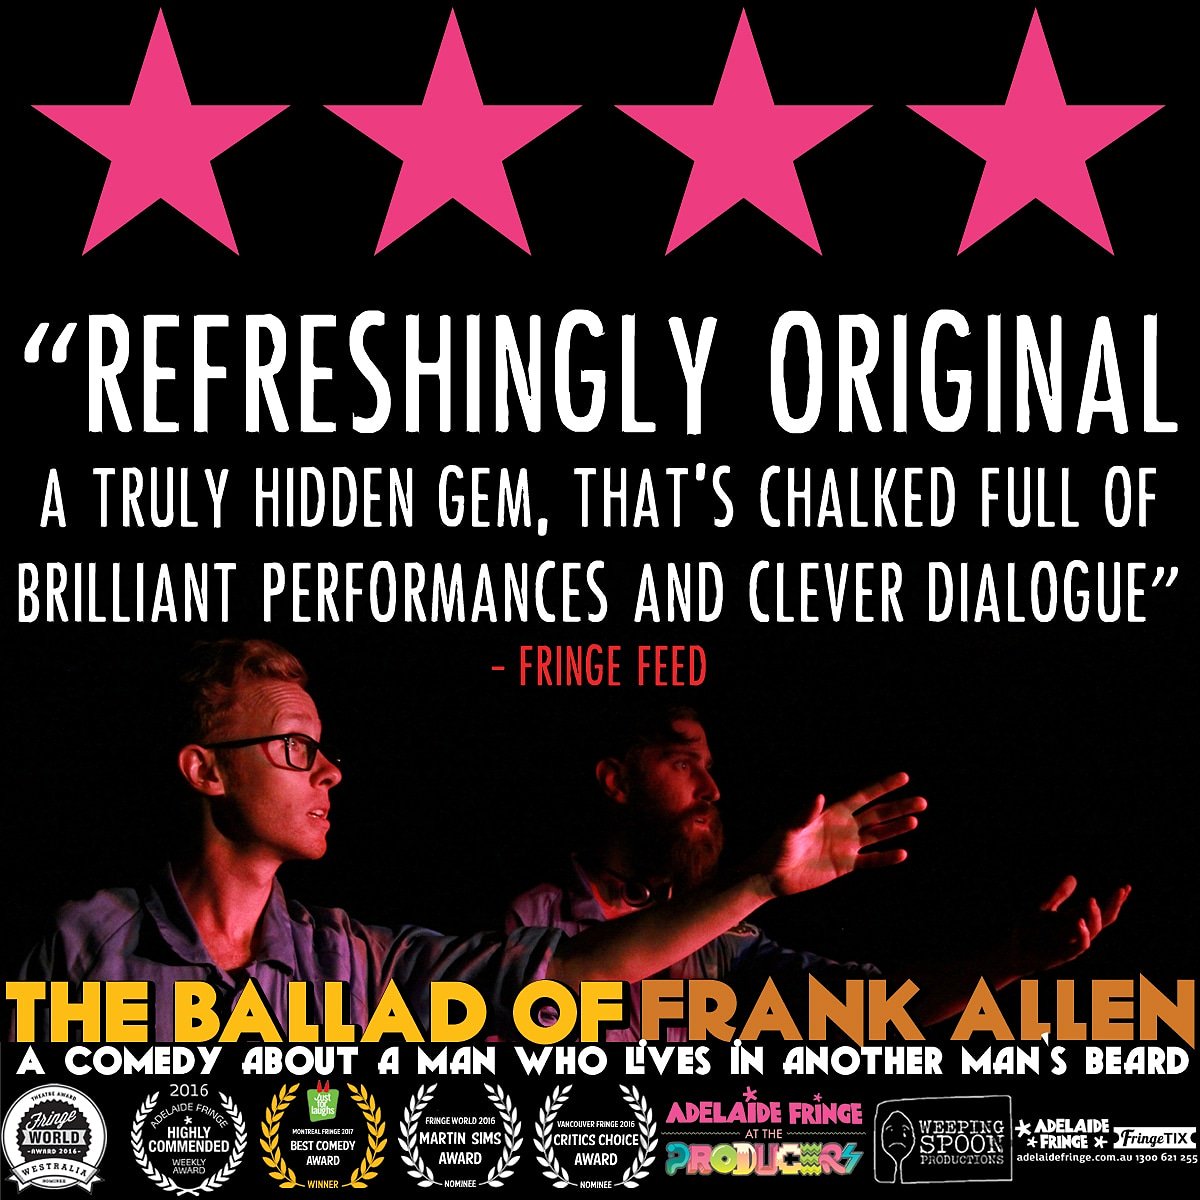 #Adelaide TONIGHT is your last chance to see #TheBalladOfFrankAllen at @ProducersFringe. Tickets on sale through adelaidefringe.com.au or at the door!

#ADLfringe #ProducersBar #AwardWinning #Beard #Comedy #SciFi #BuddyComedy #Fringe #Theatre #IndyTheatre